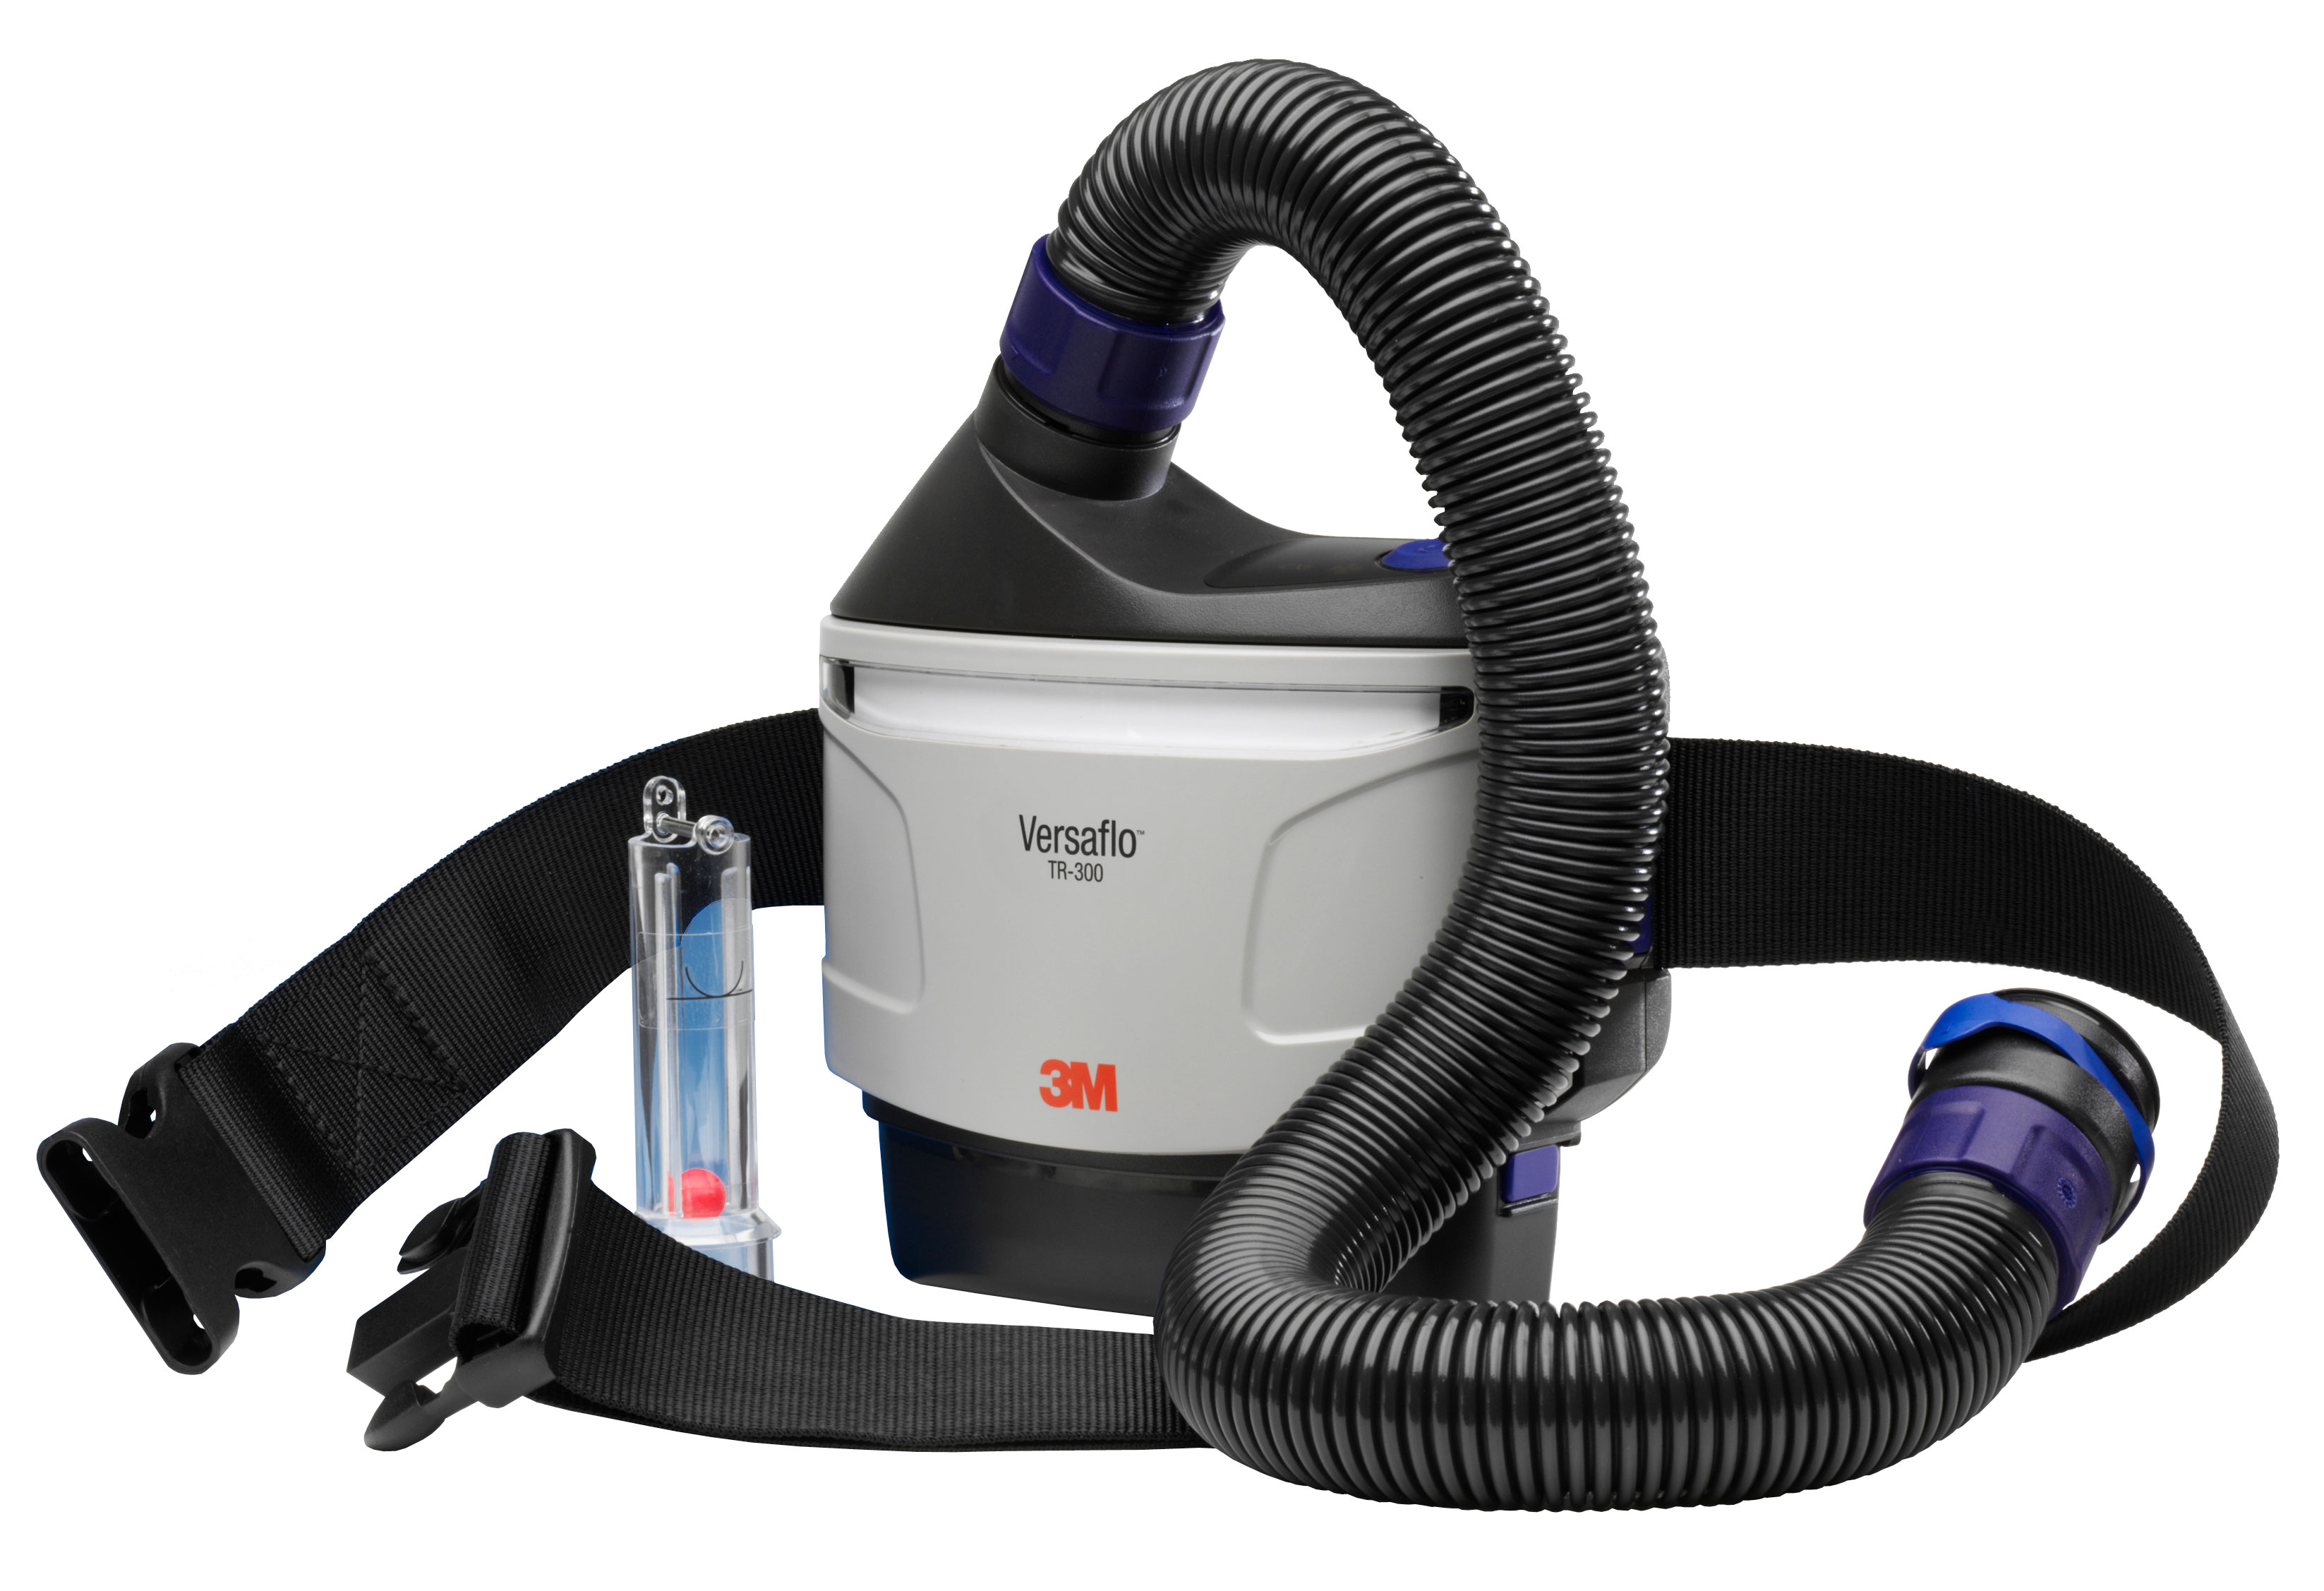 Versaflo TR-315E Powered Air Starter Kit. 3M. TR300 air respirator systems, batteries, chargers and filters. Caracteristics: This starter kit includes the TR-302E turbo unit, particulate filter, pre-filter, standard belt, high capacity battery, battery charger kit, self-adjusting breathing tube and air flow indicator